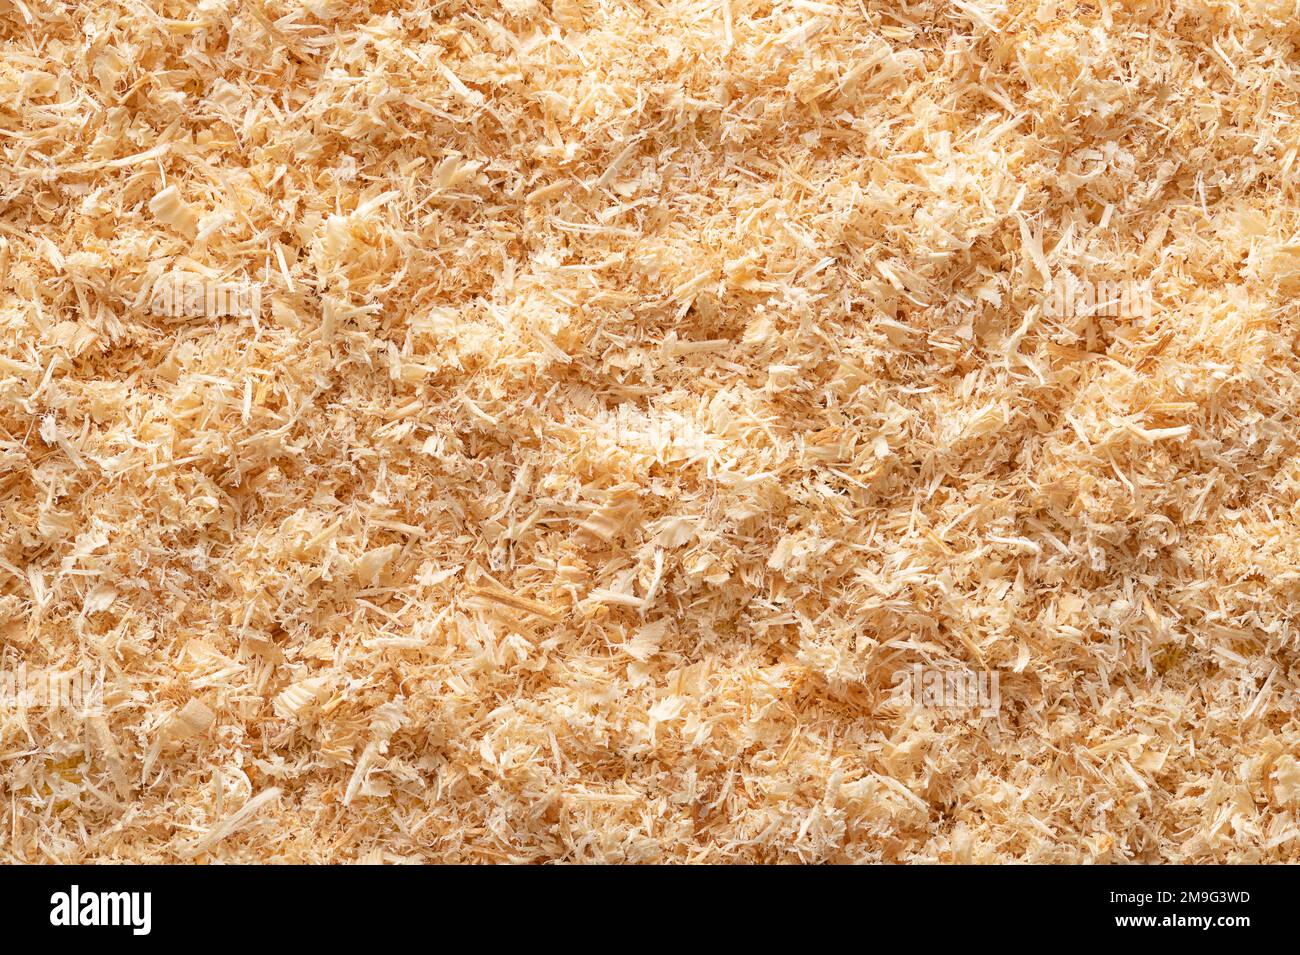 Wood flour, wood powder, surface of fine sawdust, formed by sawing dried spruce. Finely pulverized wood, a by-product and waste product. Stock Photo